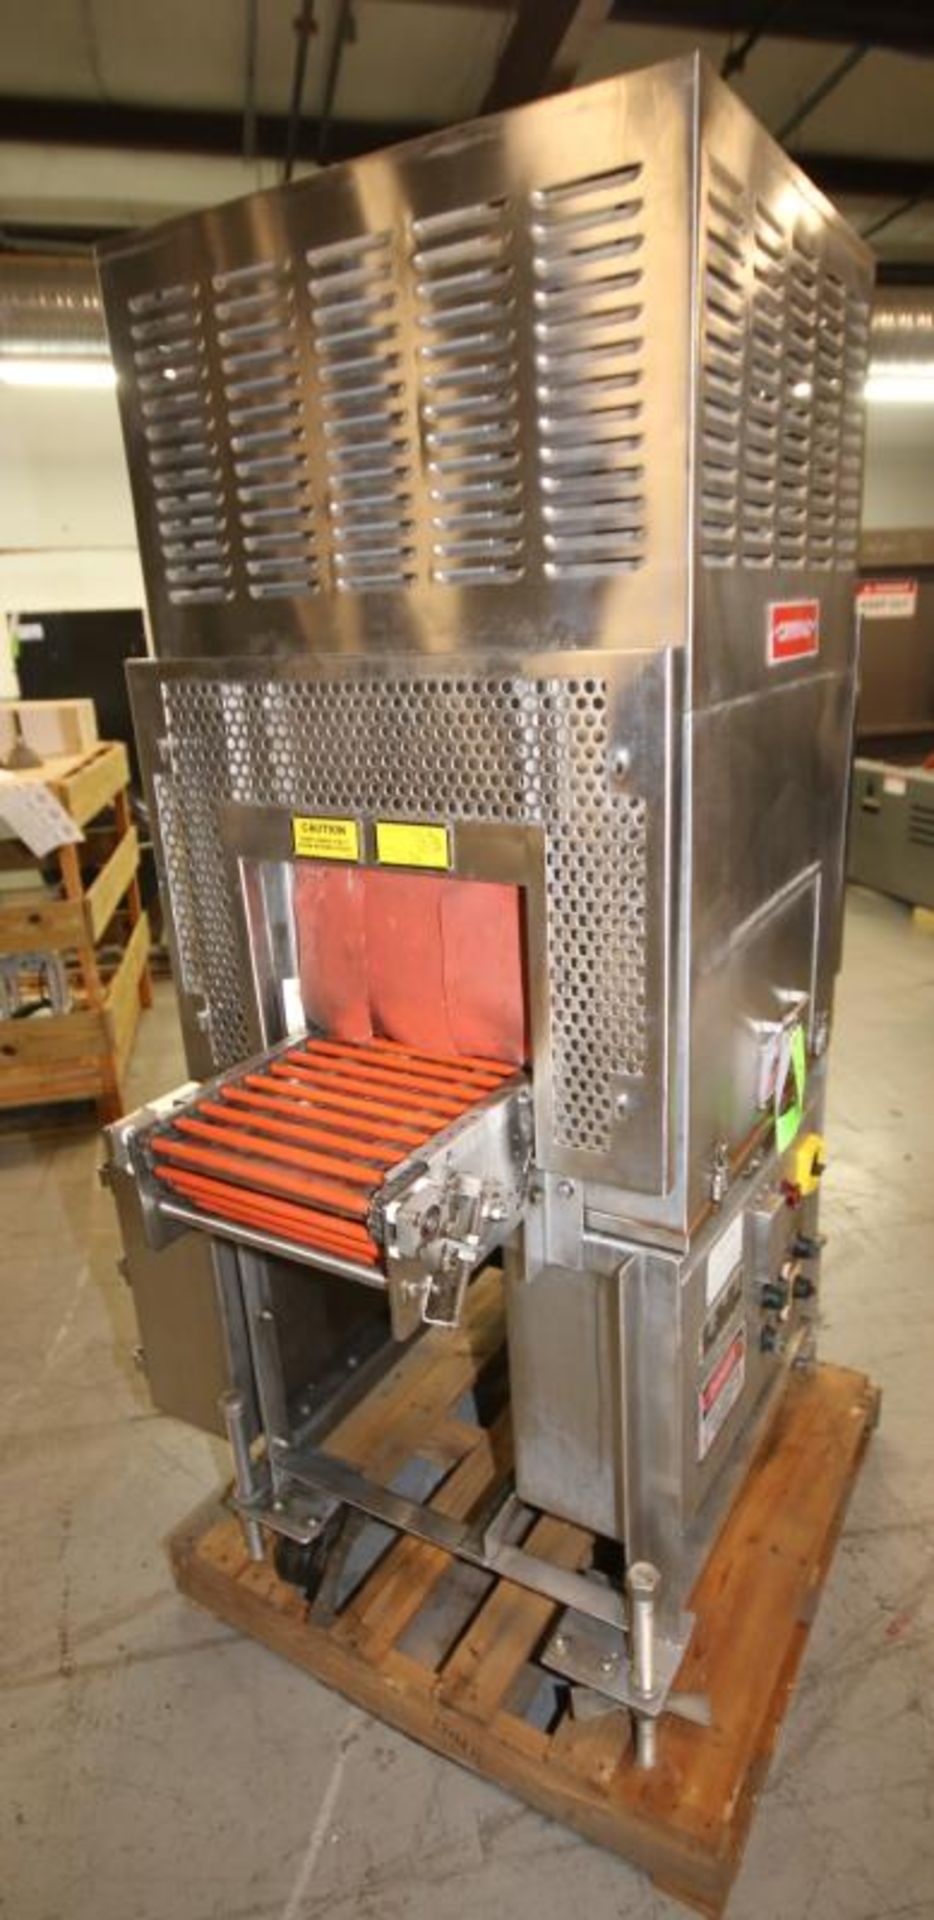 Cryovac S/S Shrink Tunnel, Model 6582A - 1427, SN 0296081, with 9" H x 11.5" H Product Opening,